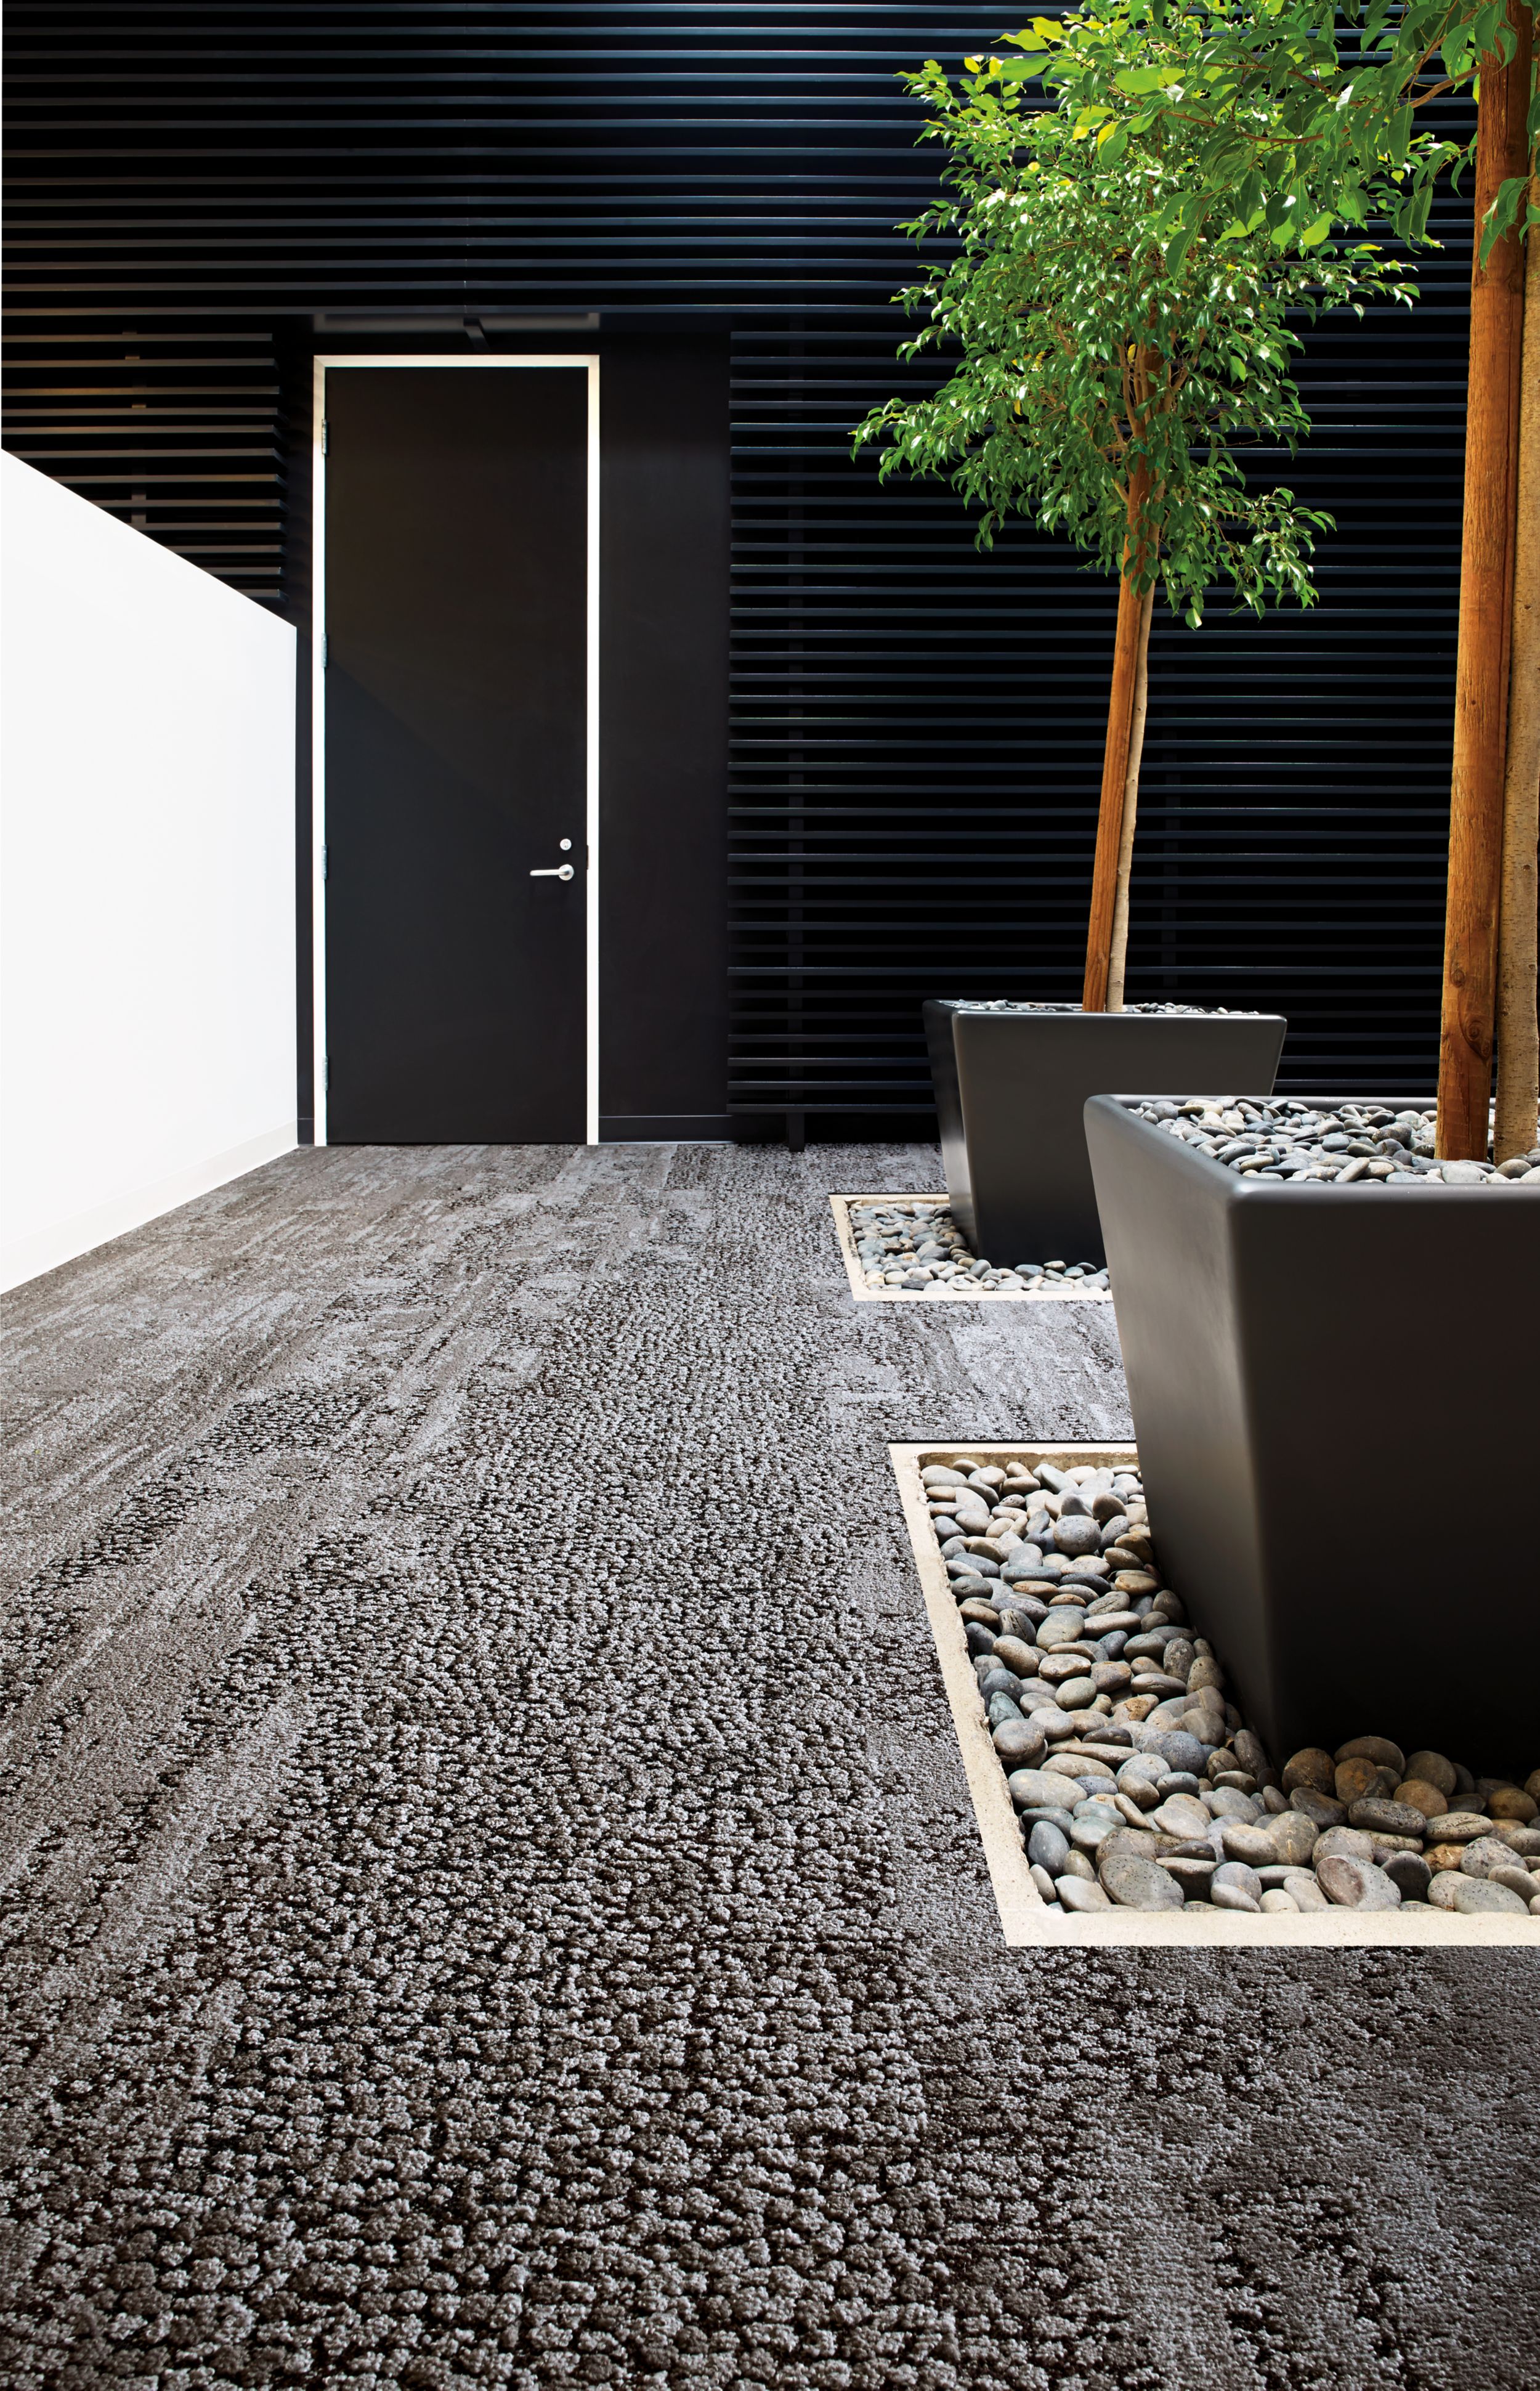 Interface HN810, HN820, HN840 and HN850 plank carpet tiles in white anc black room with potted trees and river rock número de imagen 9